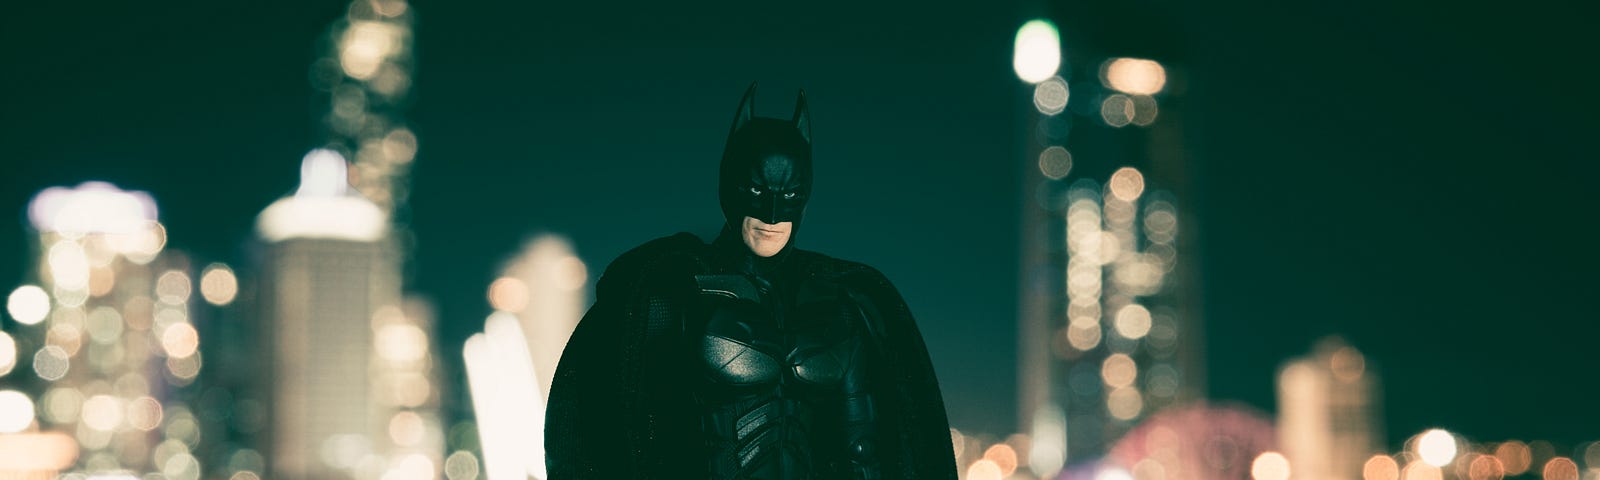 Photo of Batman with night skyline in background.